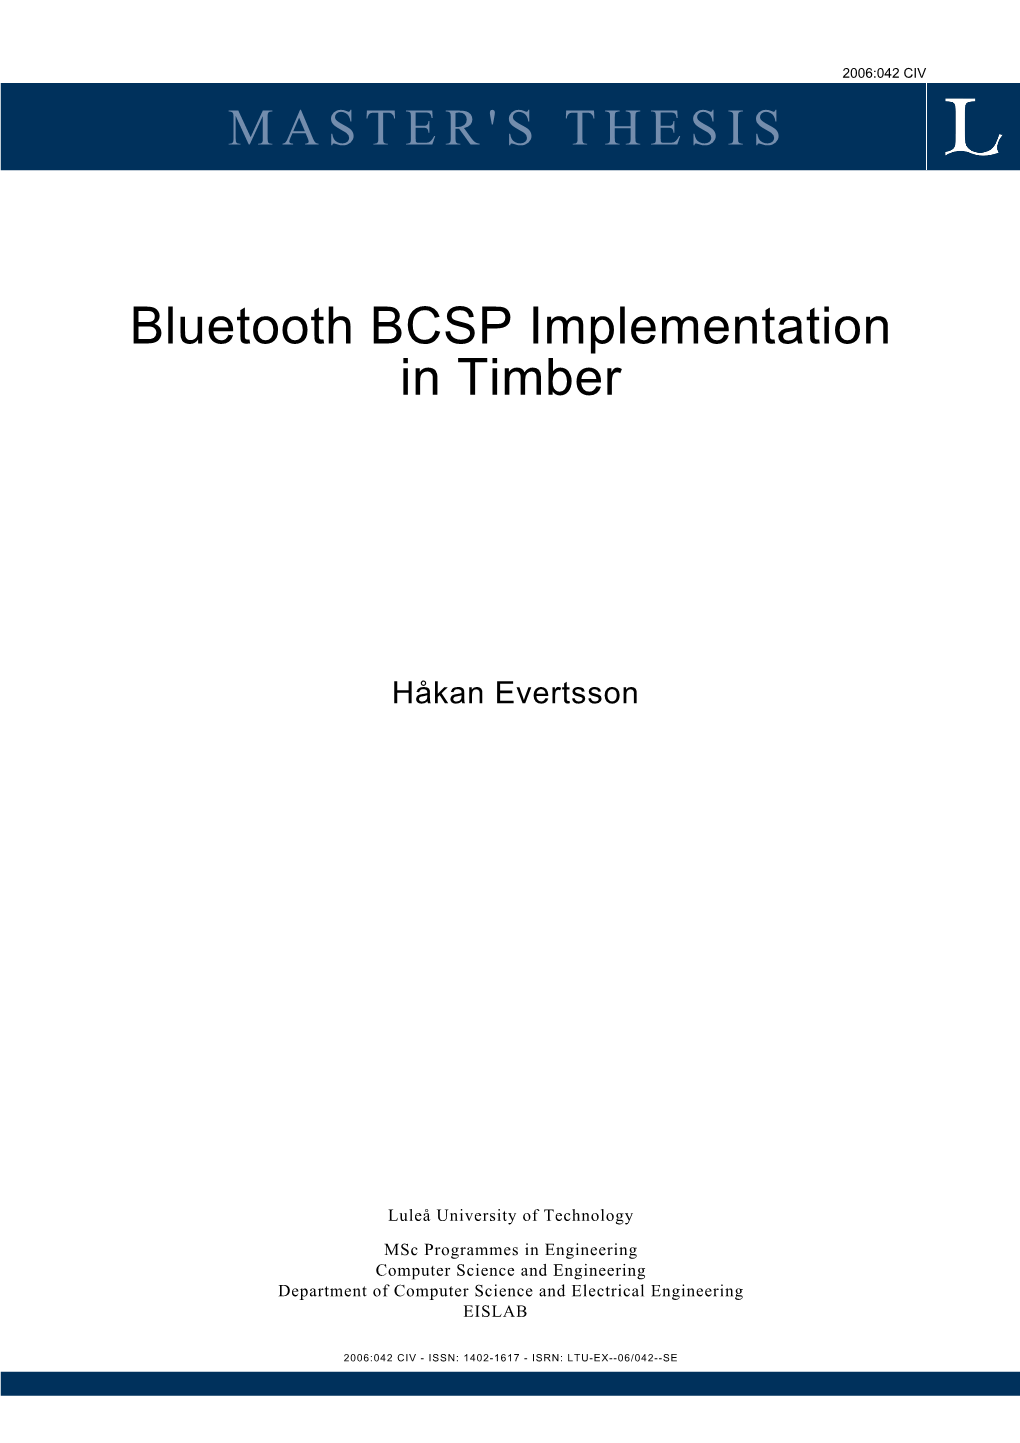 Bluetooth BCSP Implementation in Timber